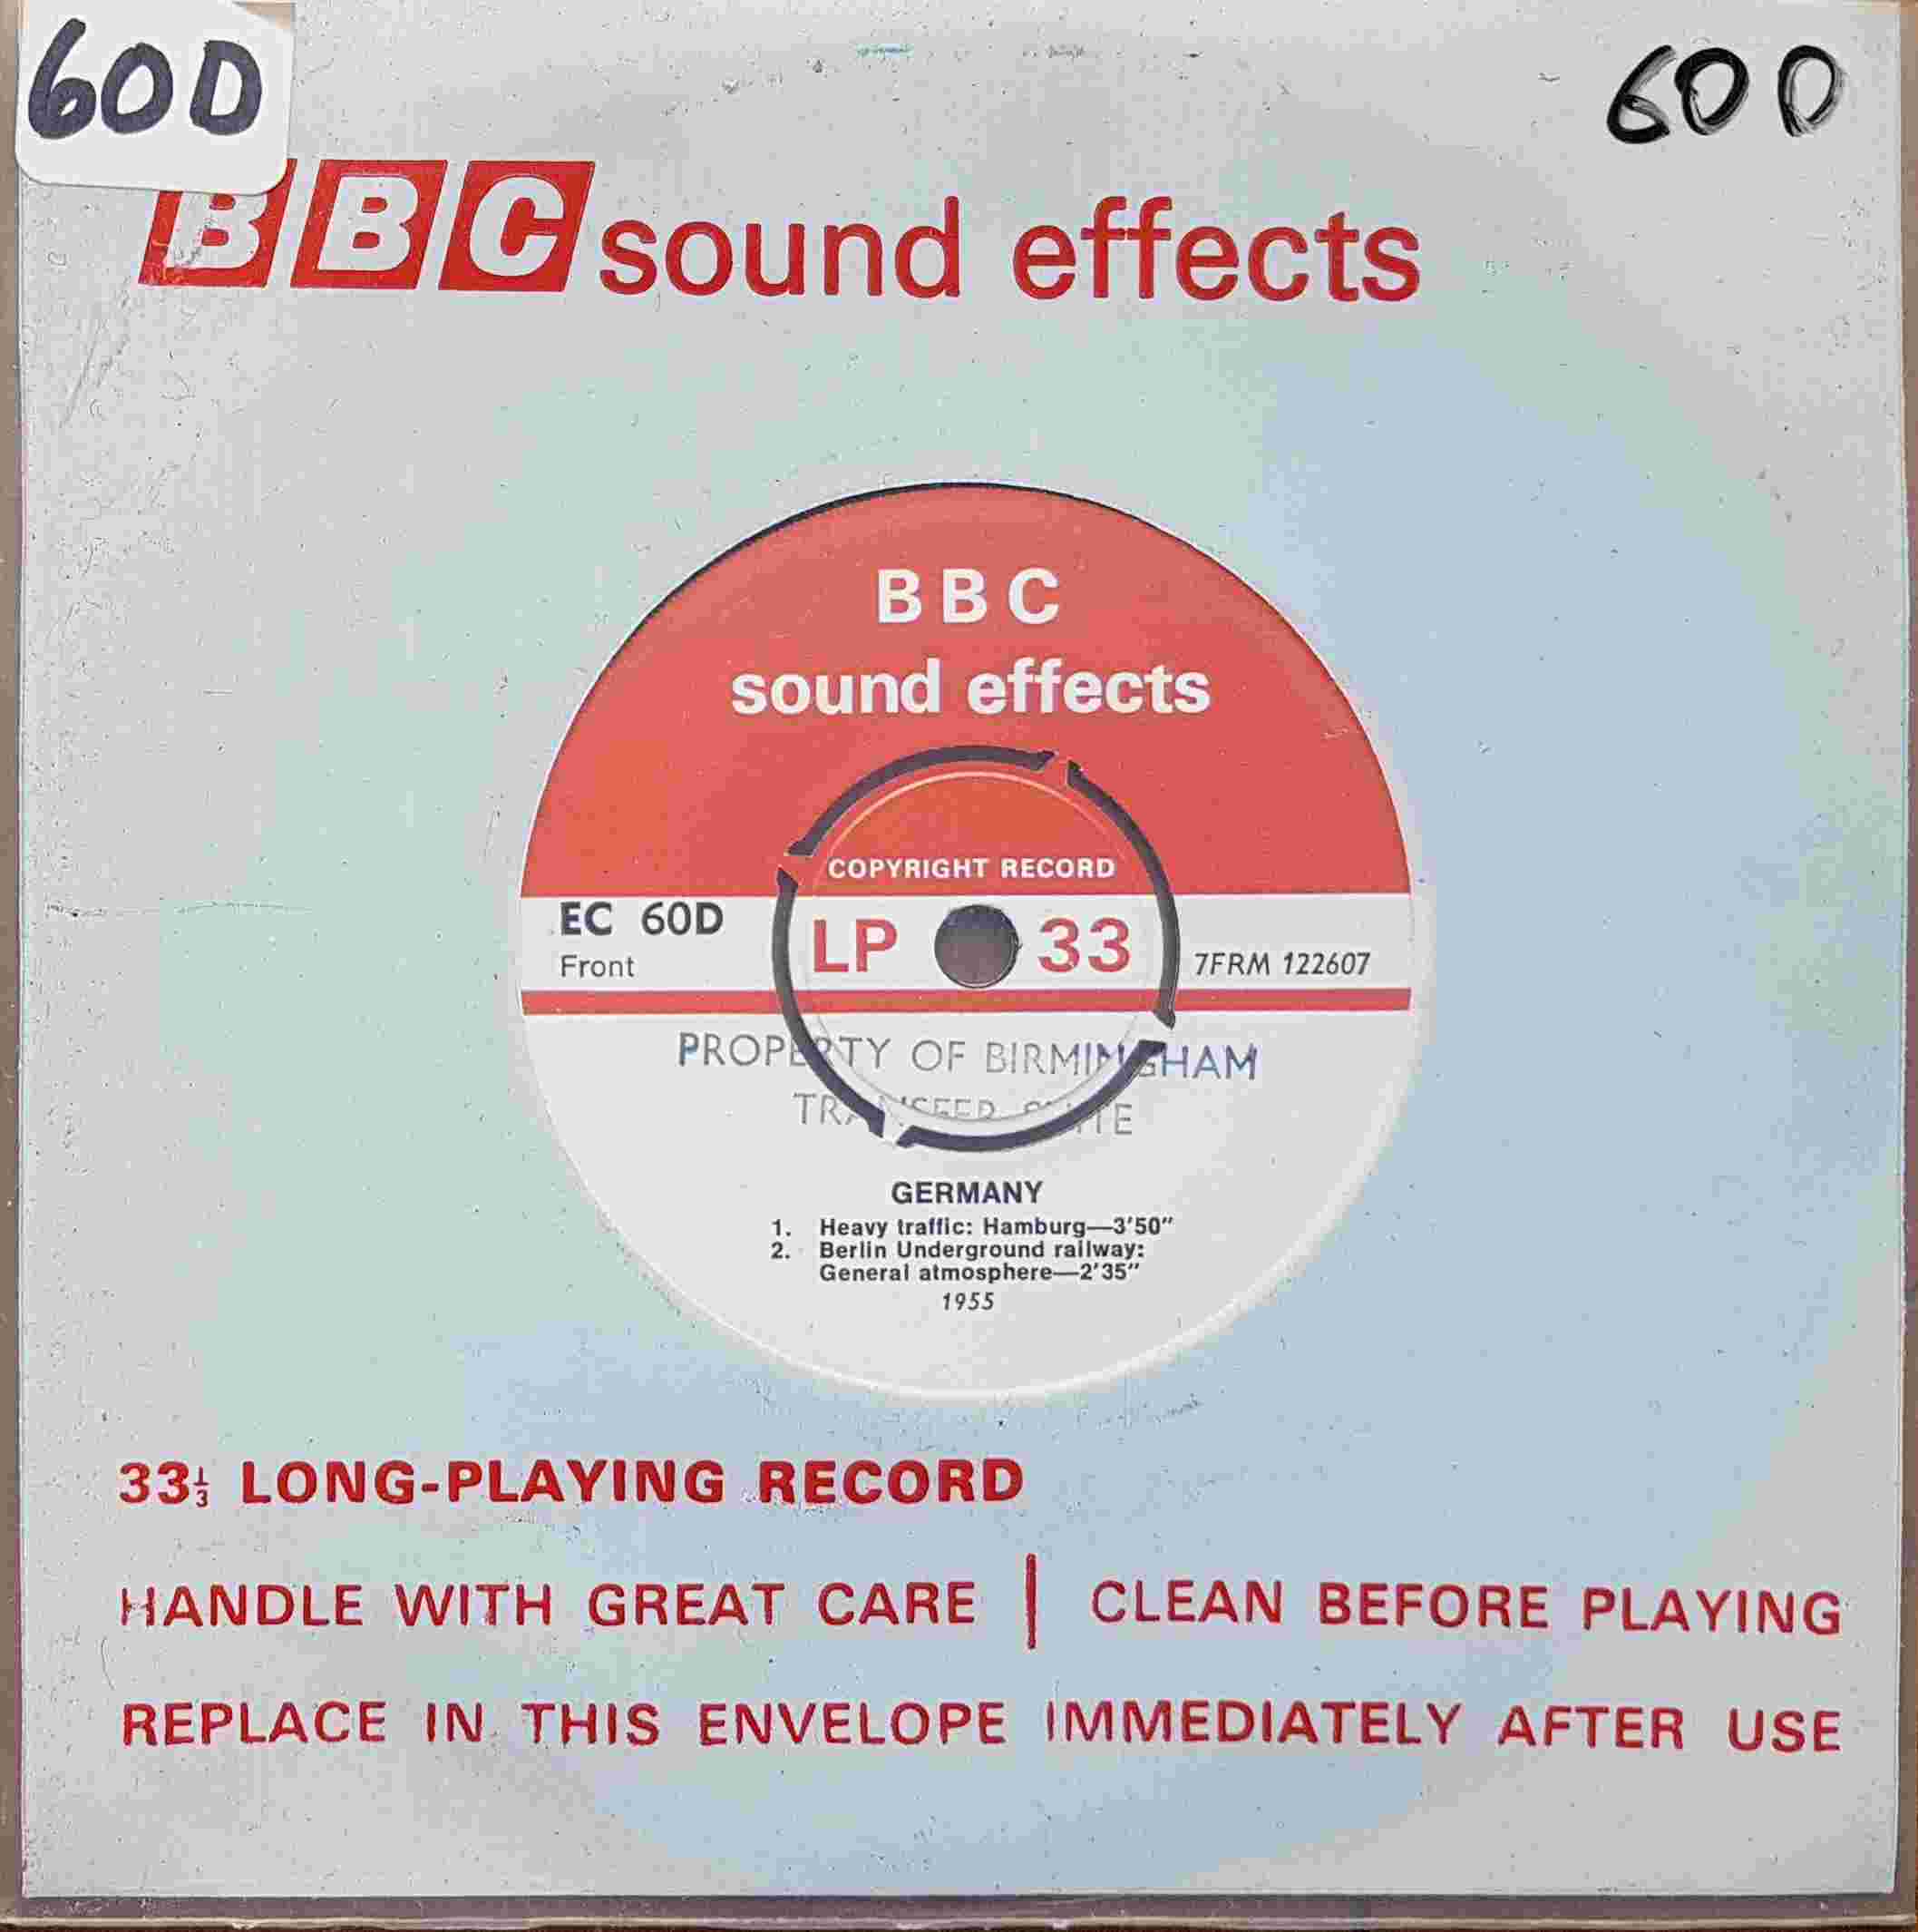 Picture of EC 60D Germany by artist Not registered from the BBC records and Tapes library